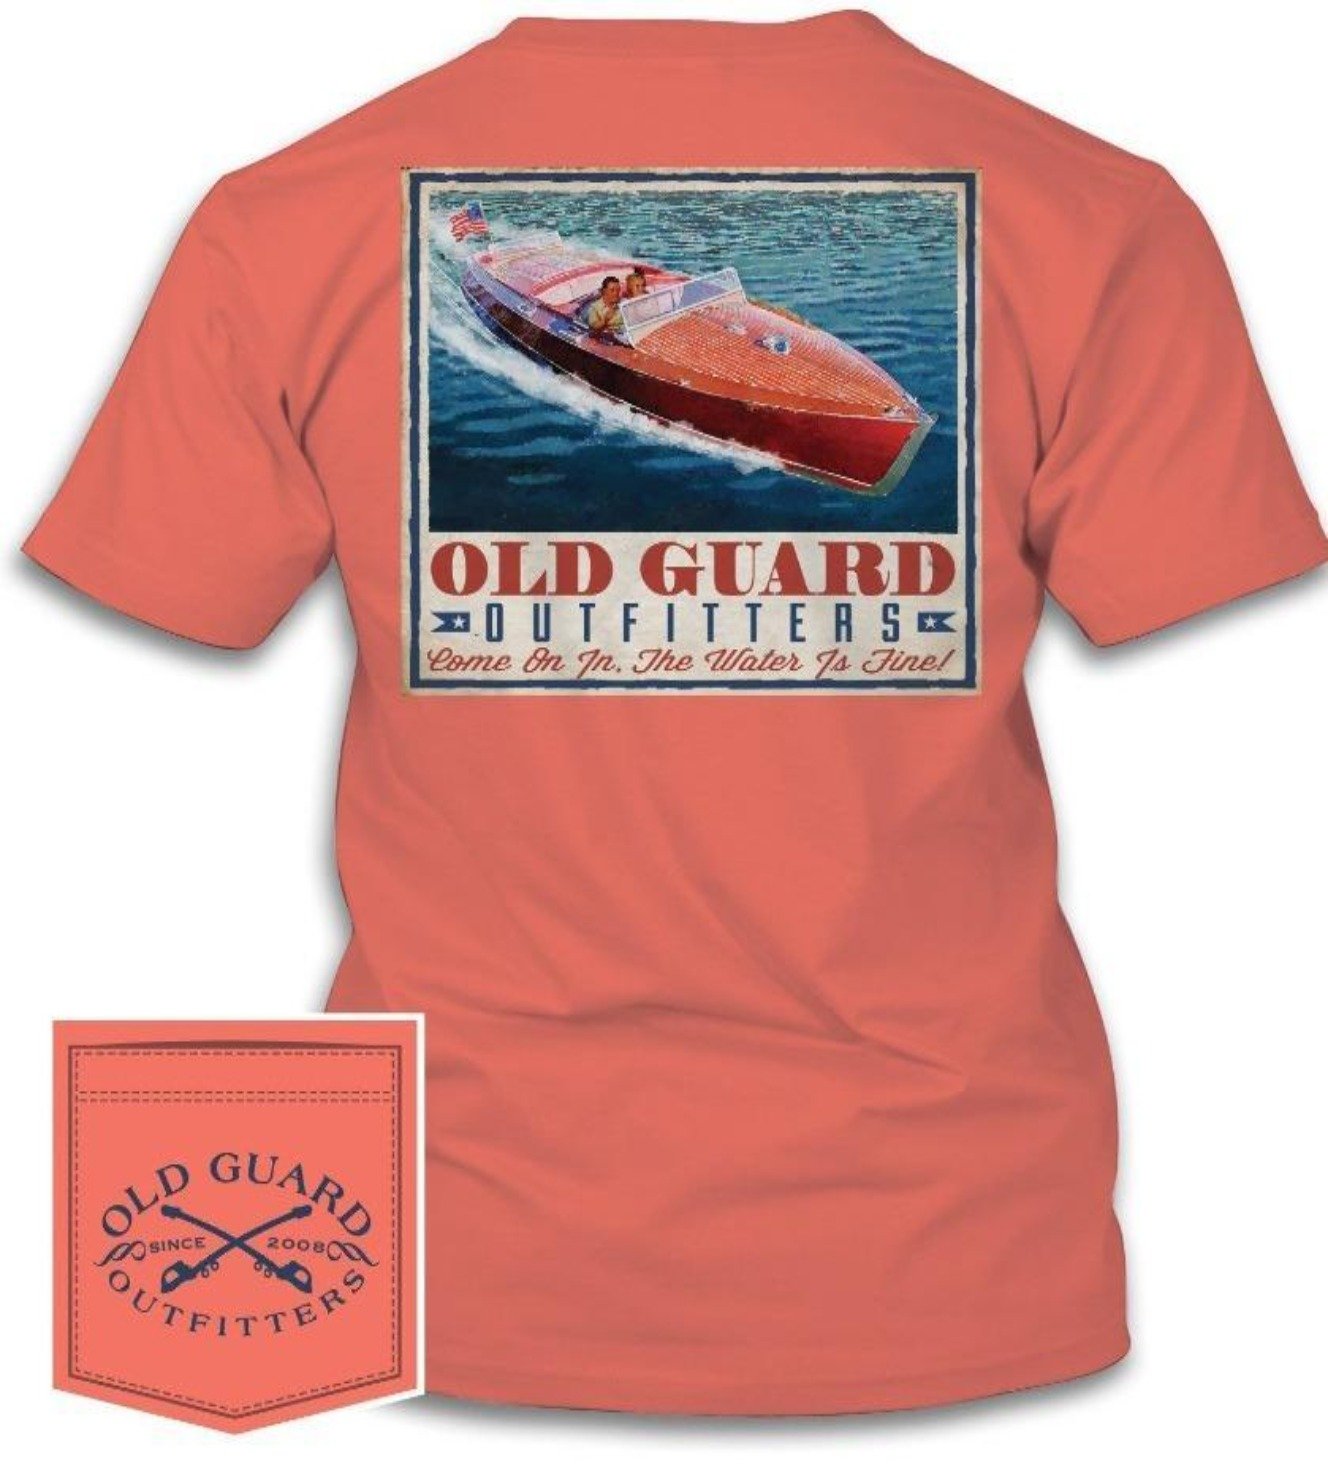 Water Is Fine - Short Sleeve T-Shirt by Old Guard Outfitters